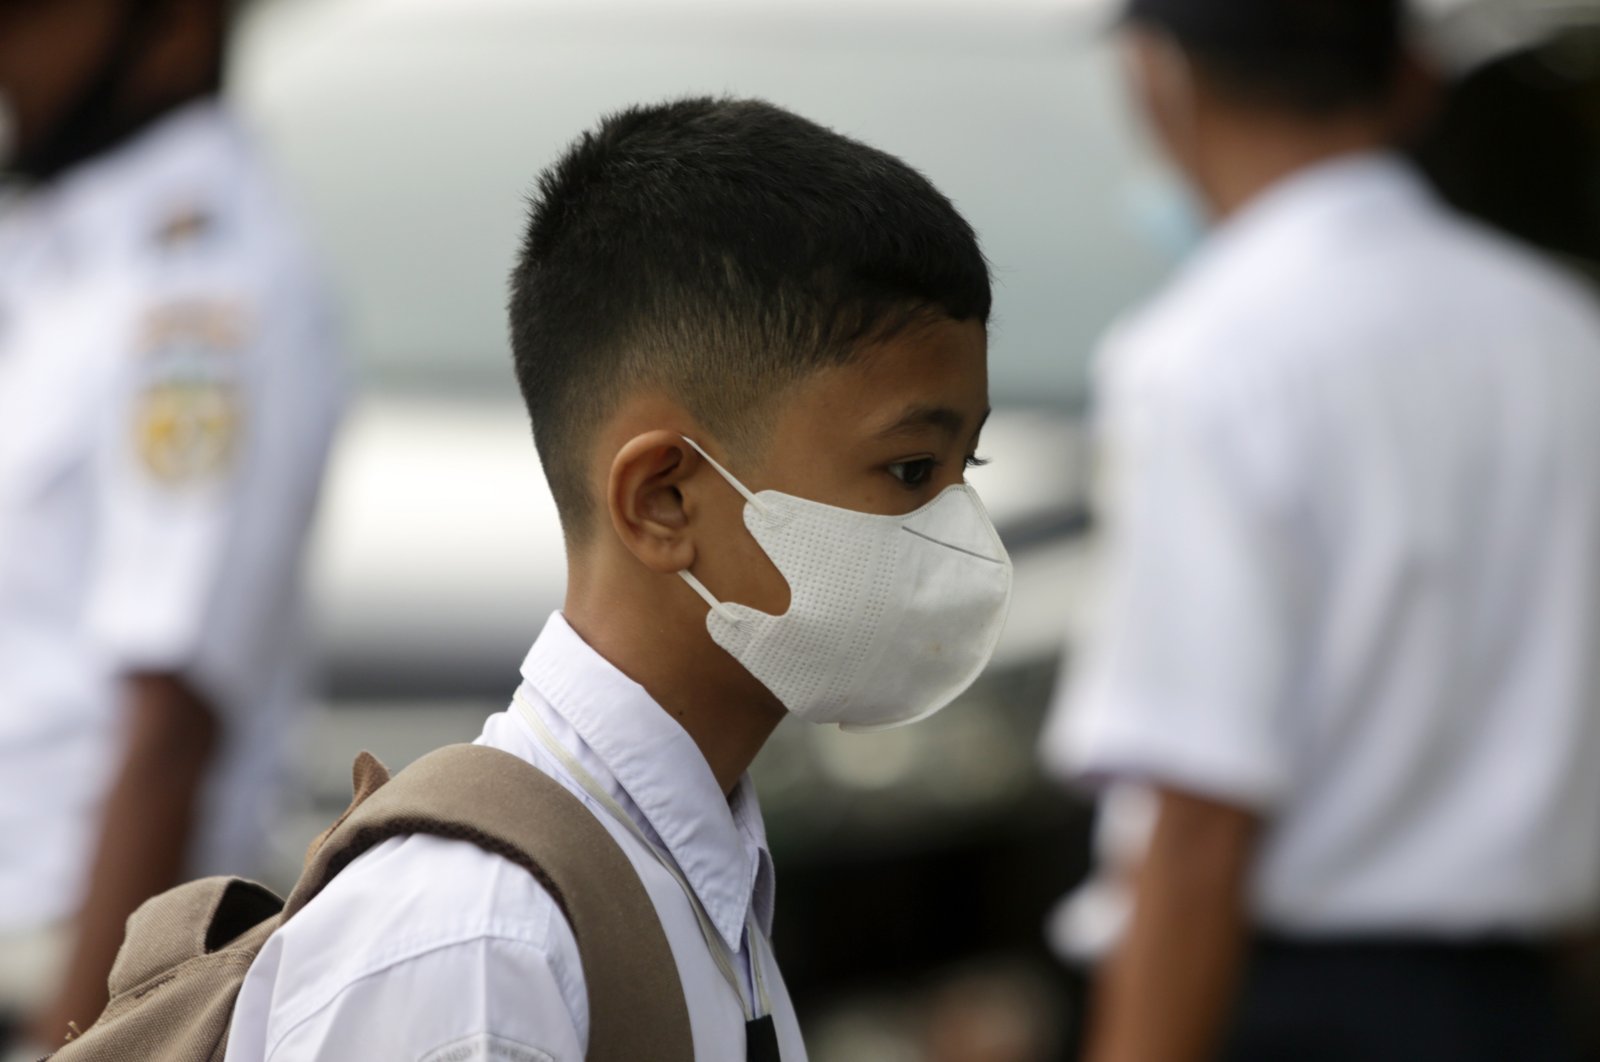 Students wear protective masks as one of the requirements to take part in face-to-face lessons, in Banda Aceh, Indonesia, Feb. 8, 2022. (EPA Photo)